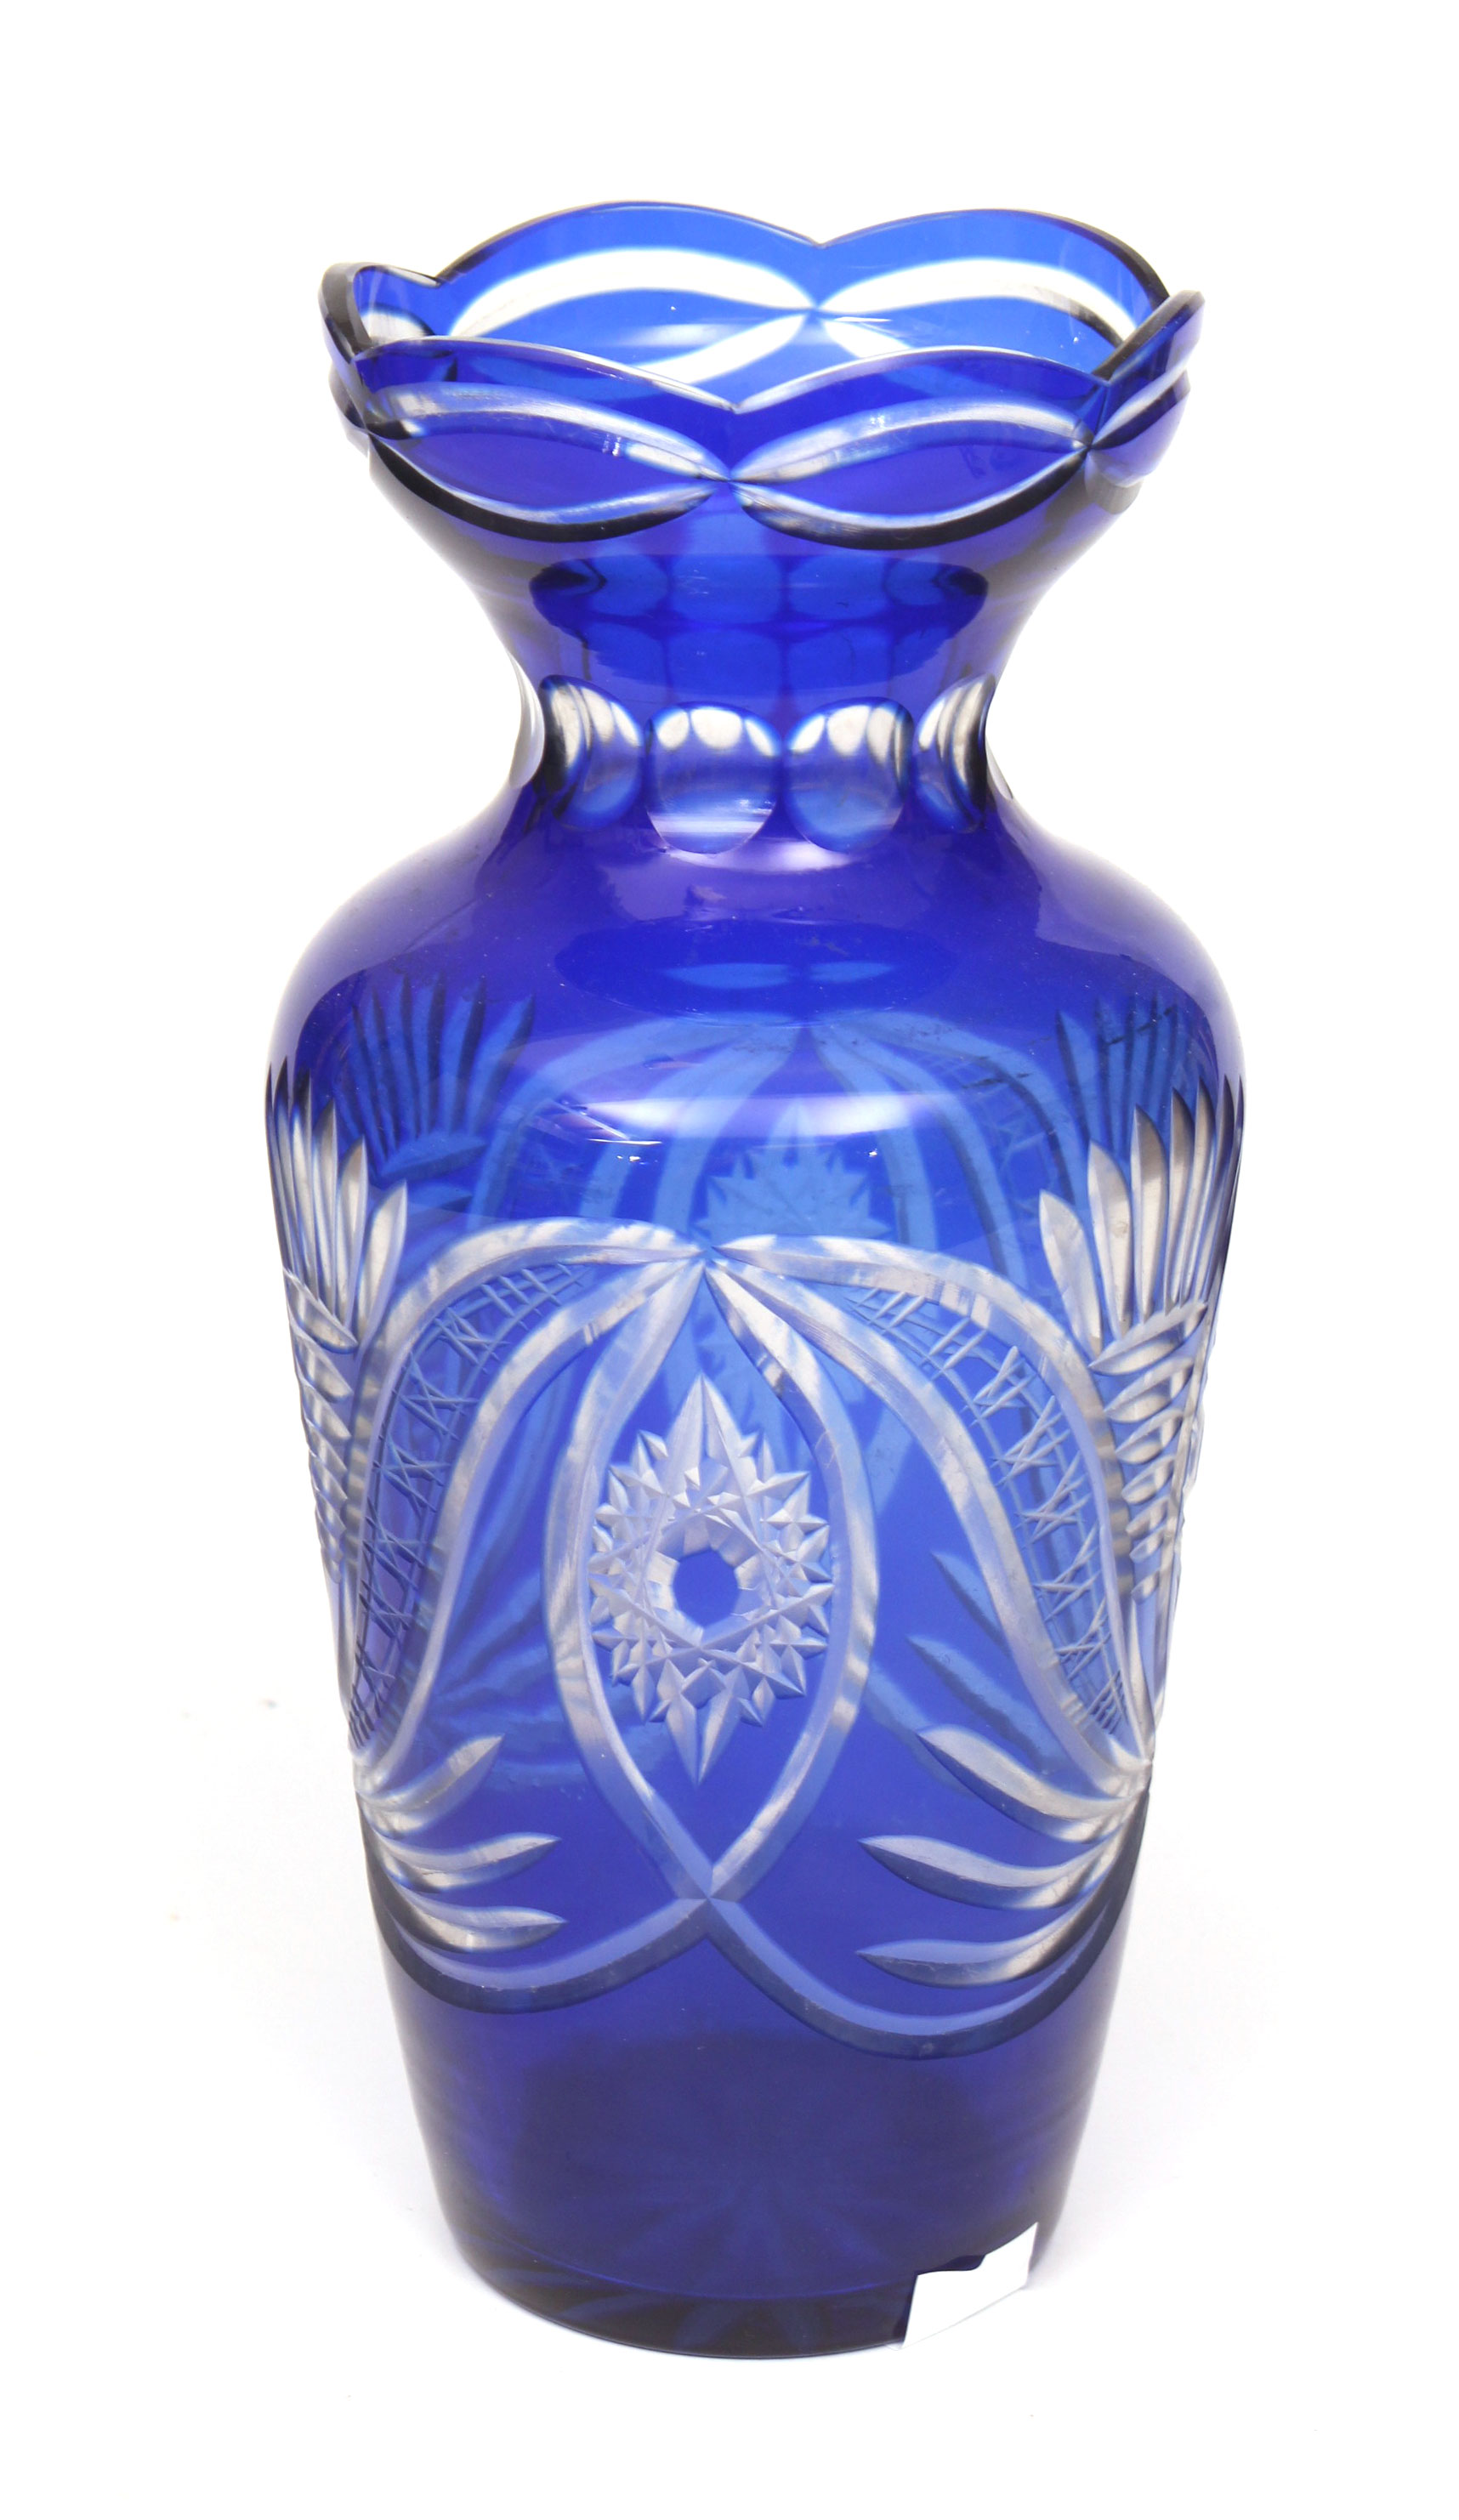 Colored Glass Vase From Ilguciems Factory Art Embassy Antiques Gallery